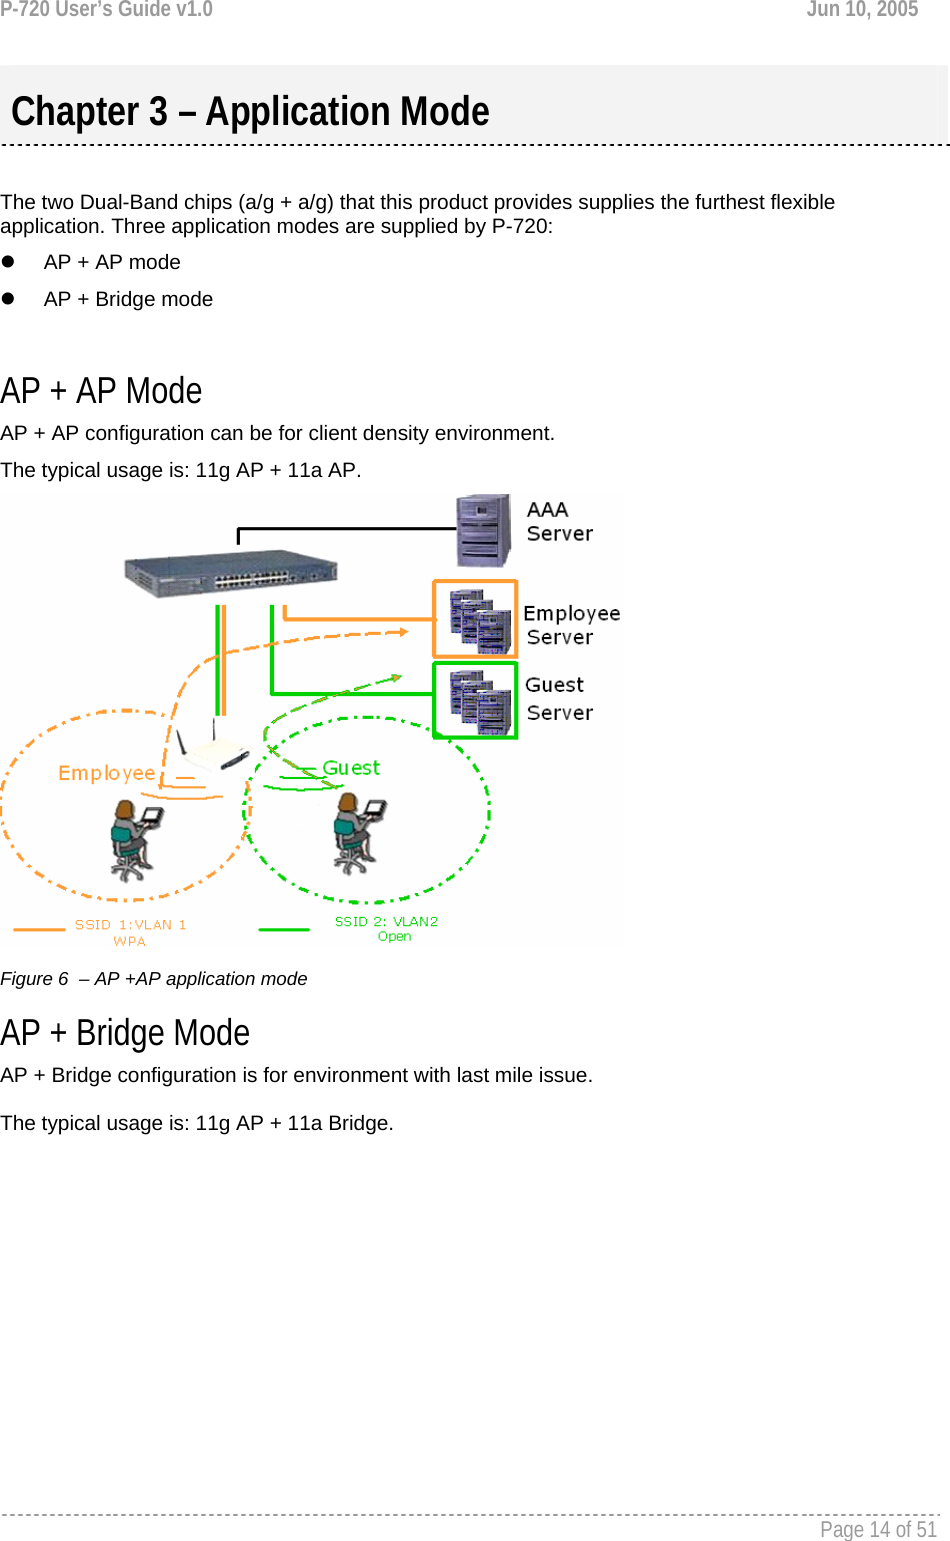 P-720 User’s Guide v1.0  Jun 10, 2005     Page 14 of 51    The two Dual-Band chips (a/g + a/g) that this product provides supplies the furthest flexible application. Three application modes are supplied by P-720: z  AP + AP mode z  AP + Bridge mode  AP + AP Mode AP + AP configuration can be for client density environment.  The typical usage is: 11g AP + 11a AP.   Figure 6  – AP +AP application mode AP + Bridge Mode AP + Bridge configuration is for environment with last mile issue.   The typical usage is: 11g AP + 11a Bridge.   Chapter 3 – Application Mode 